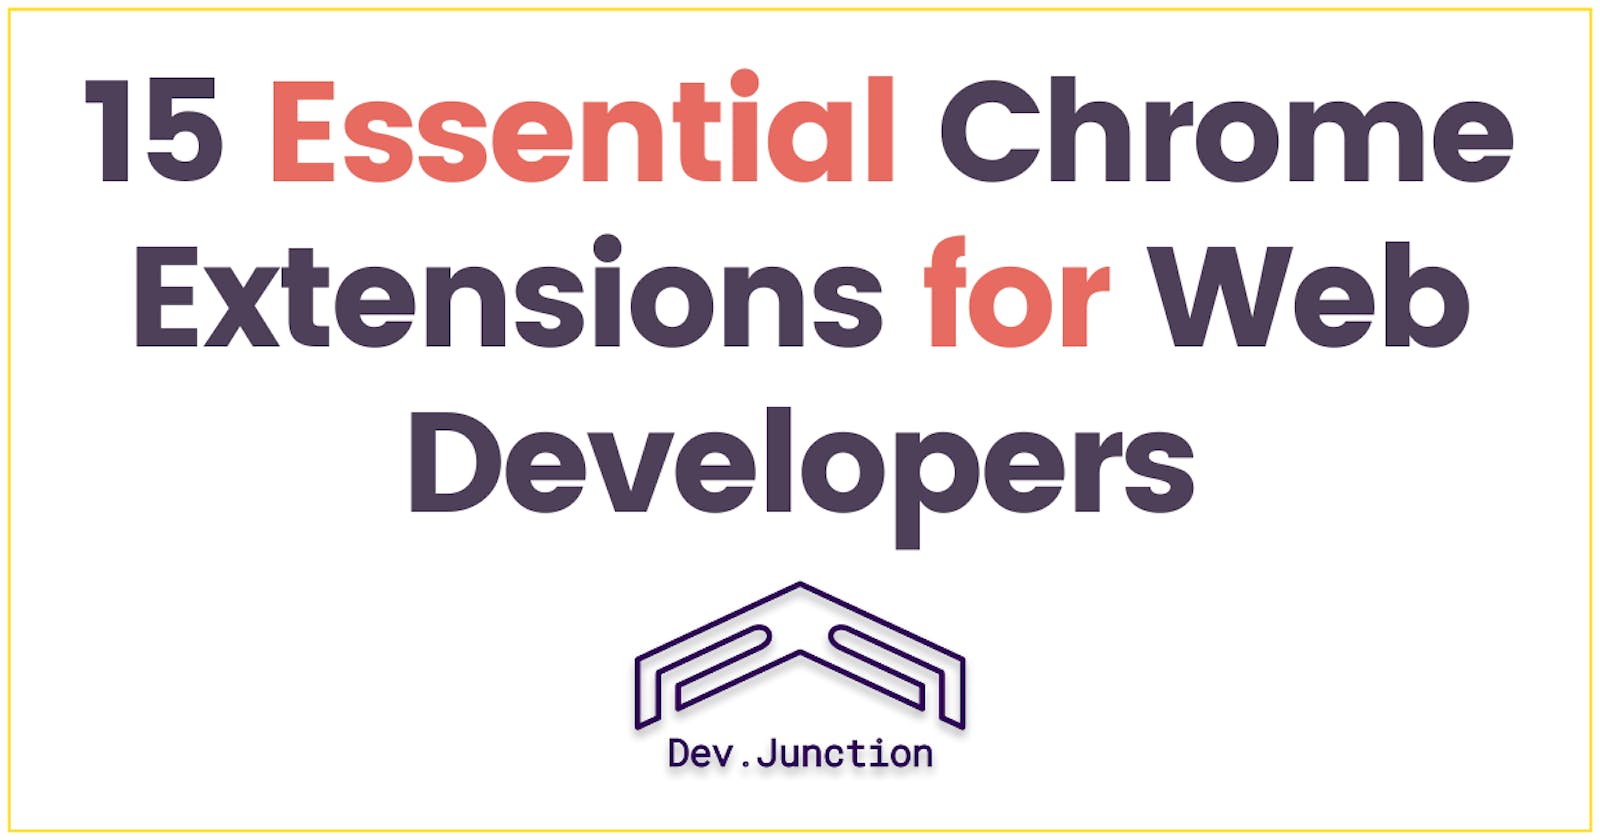 15 Essential Chrome Extensions for Web Developers